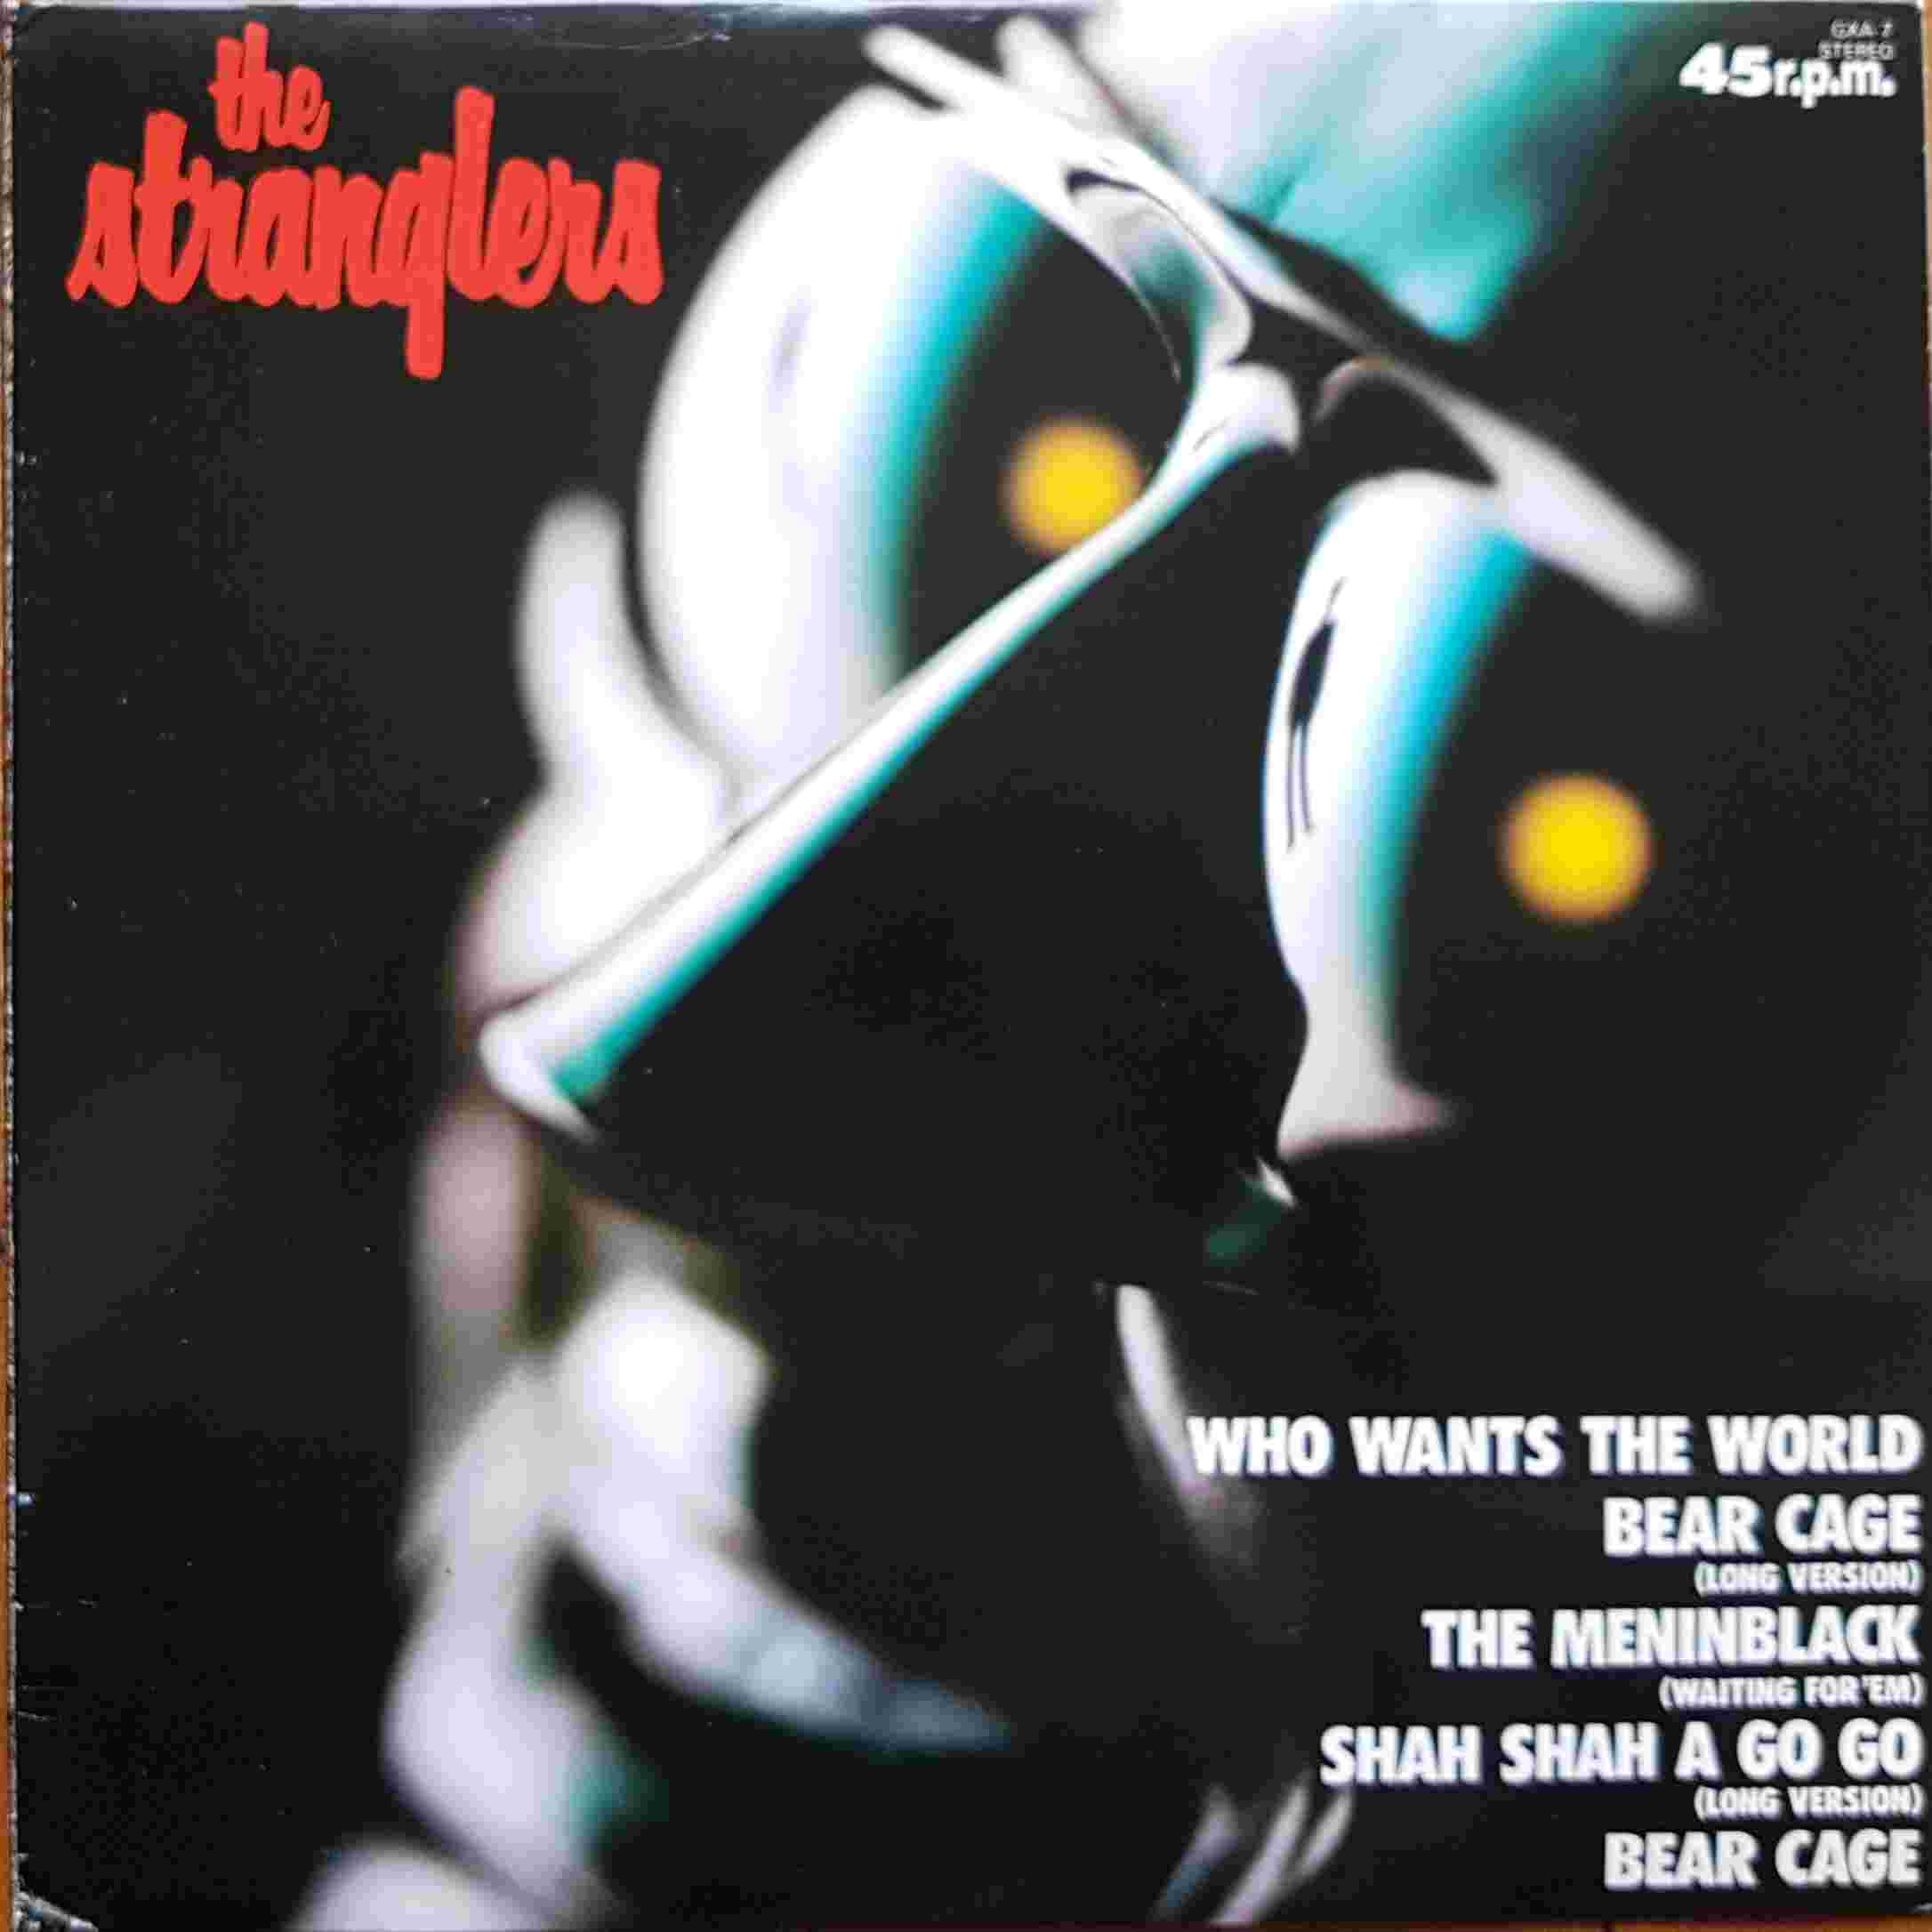 Picture of GXA 7 Who wants the World ? by artist The Stranglers from The Stranglers